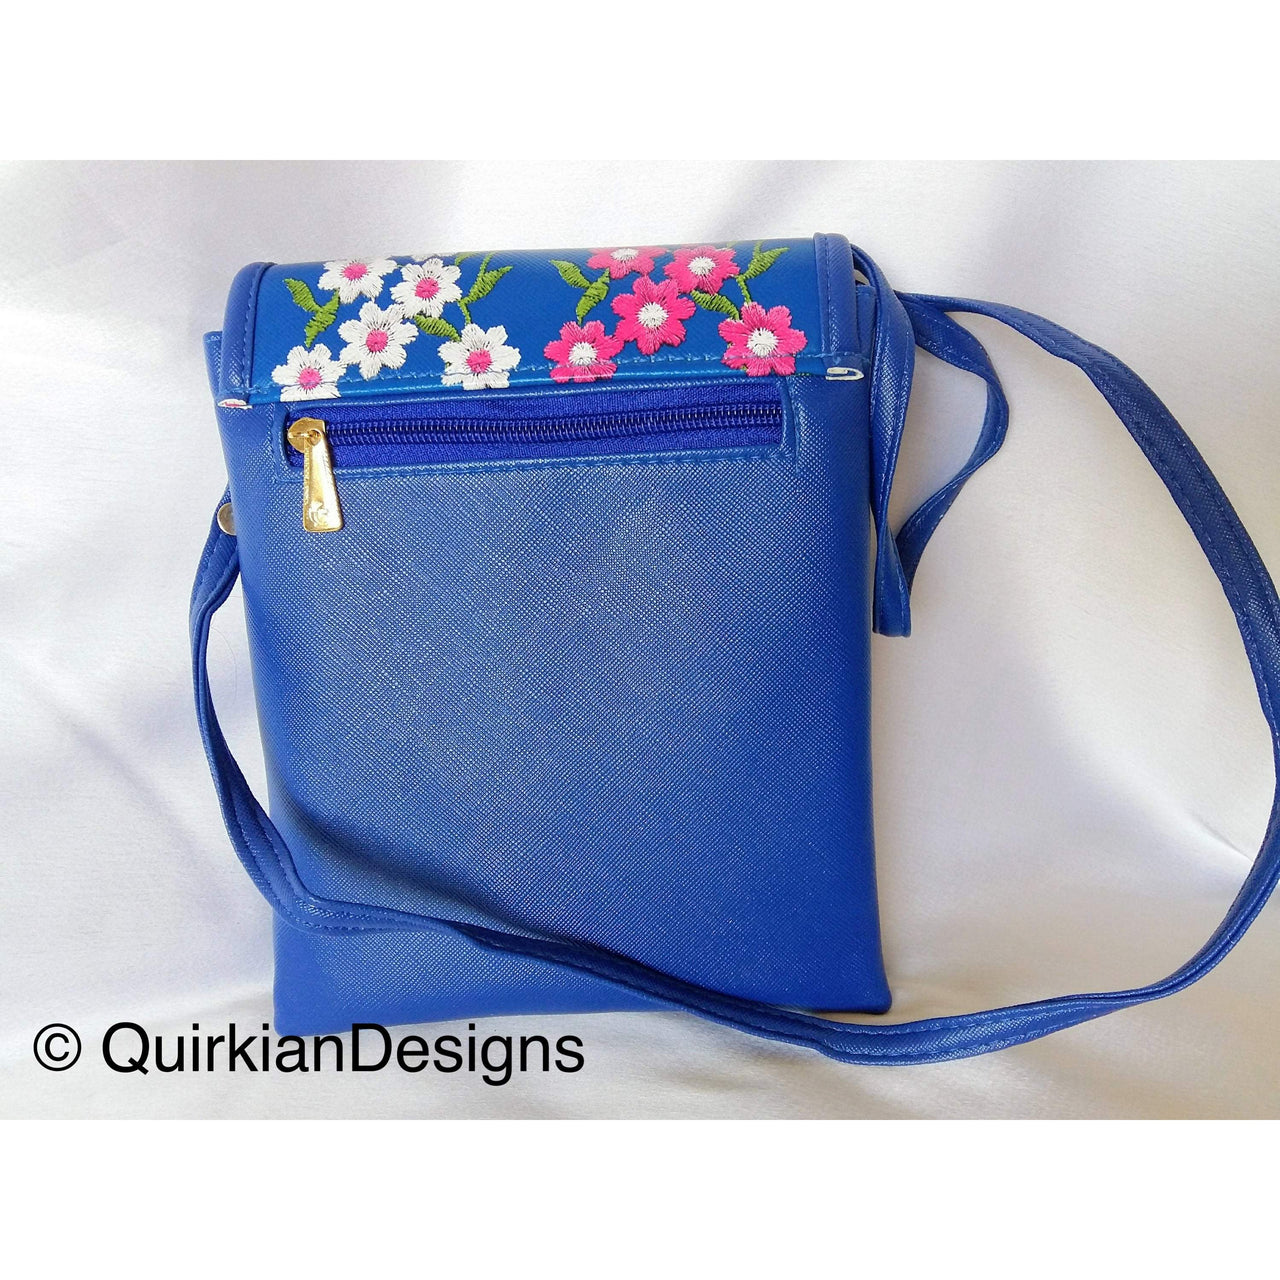 Blue Fake Leather Bag With Pink, Green And White Floral Embroidery Design, Day Clutch, Shopping Crossbody Sling Purse, Faux Leather Bag